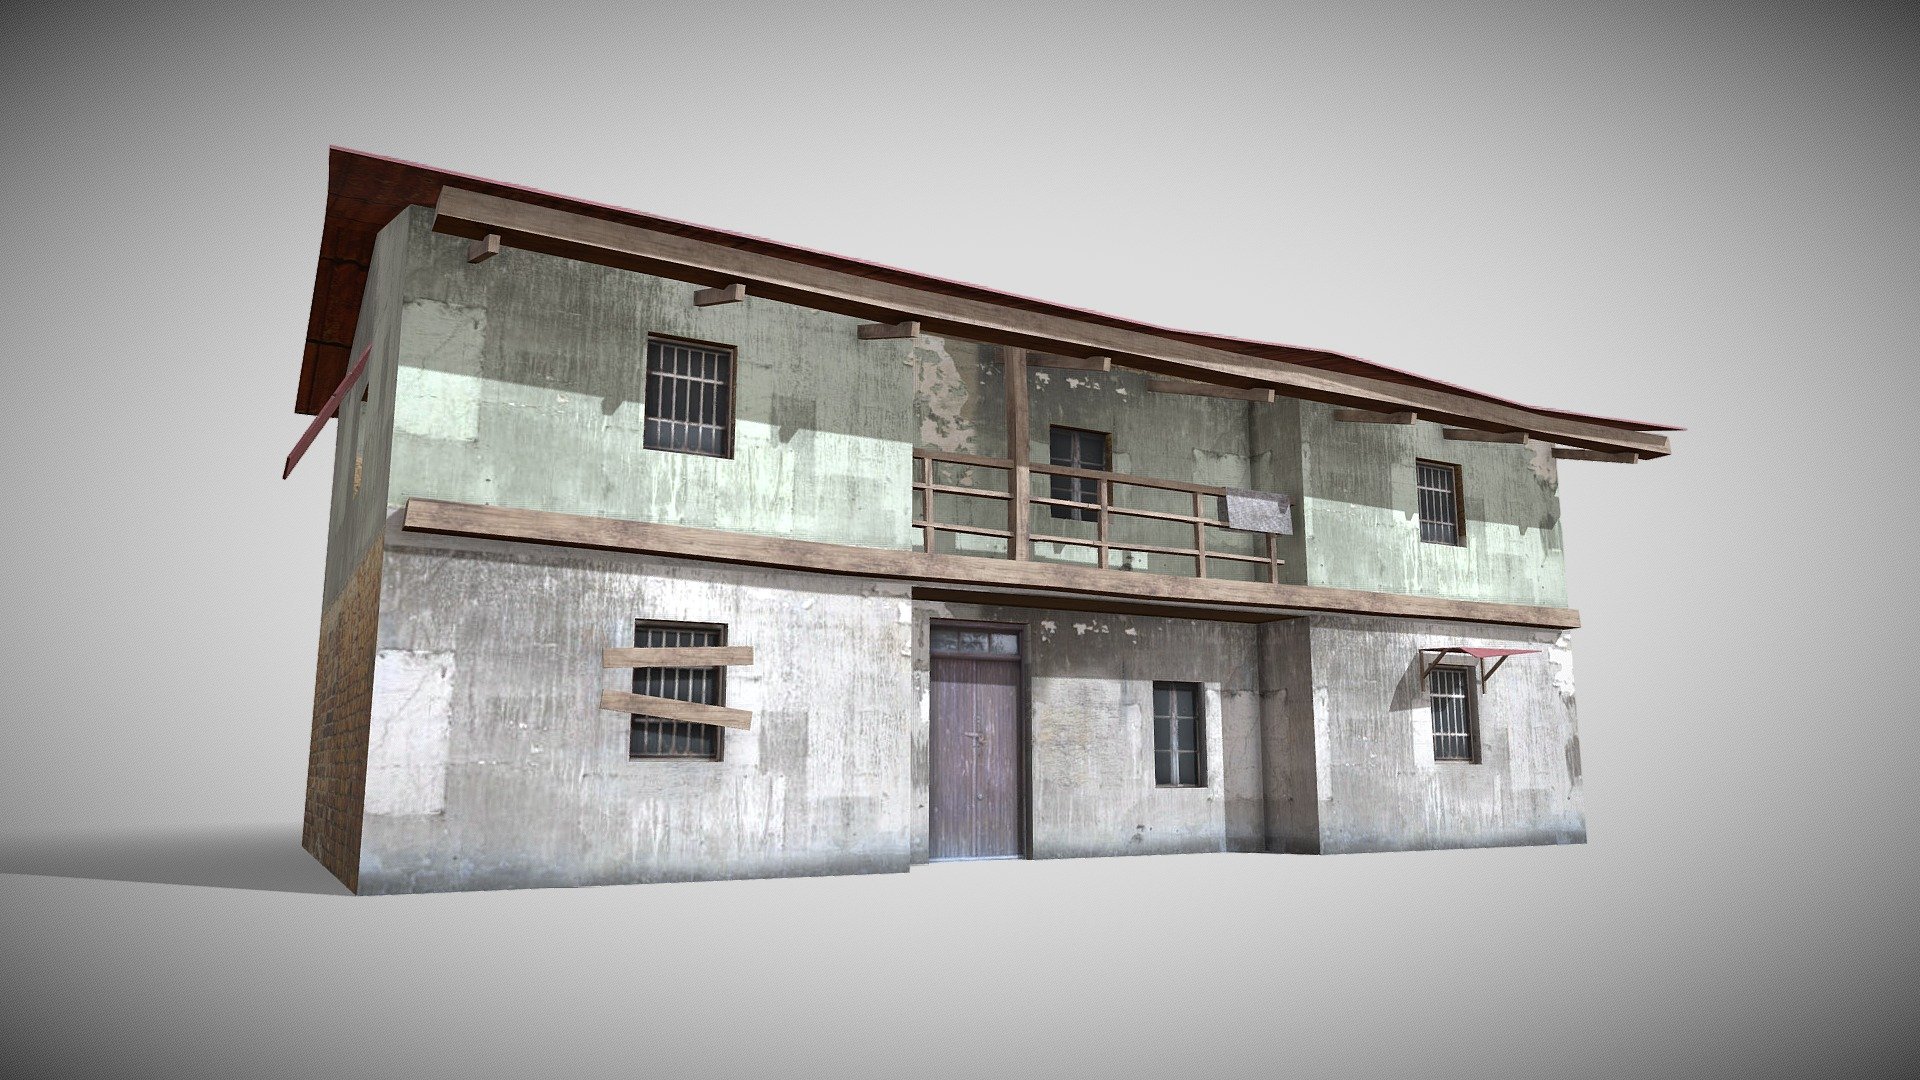 Game Ready 3D Old House /slum Native file format 3Ds max 2022 Other formats Blender 4.0 ,FBX, OBJ, All formats include materials &amp; textures

Polygons- 560 Vertices - 654

Materials &amp; textures. 1 Diffuse Map 2048x2048 - Slum X6 - Buy Royalty Free 3D model by 3DRK (@3DRK98) 3d model